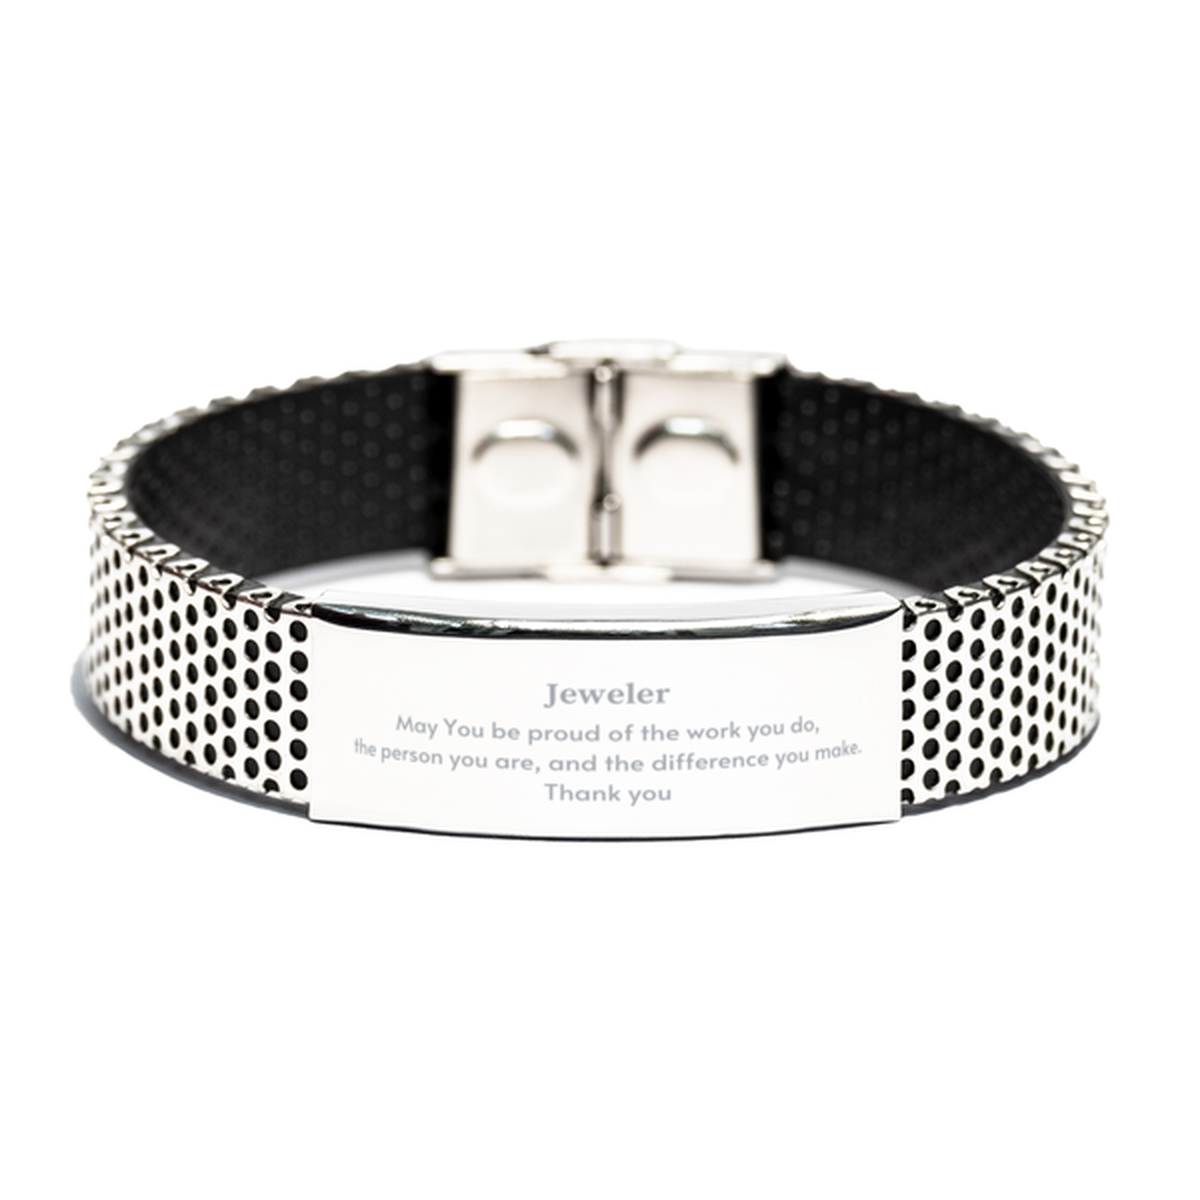 Heartwarming Stainless Steel Bracelet Retirement Coworkers Gifts for Jeweler, Jeweler May You be proud of the work you do, the person you are Gifts for Boss Men Women Friends